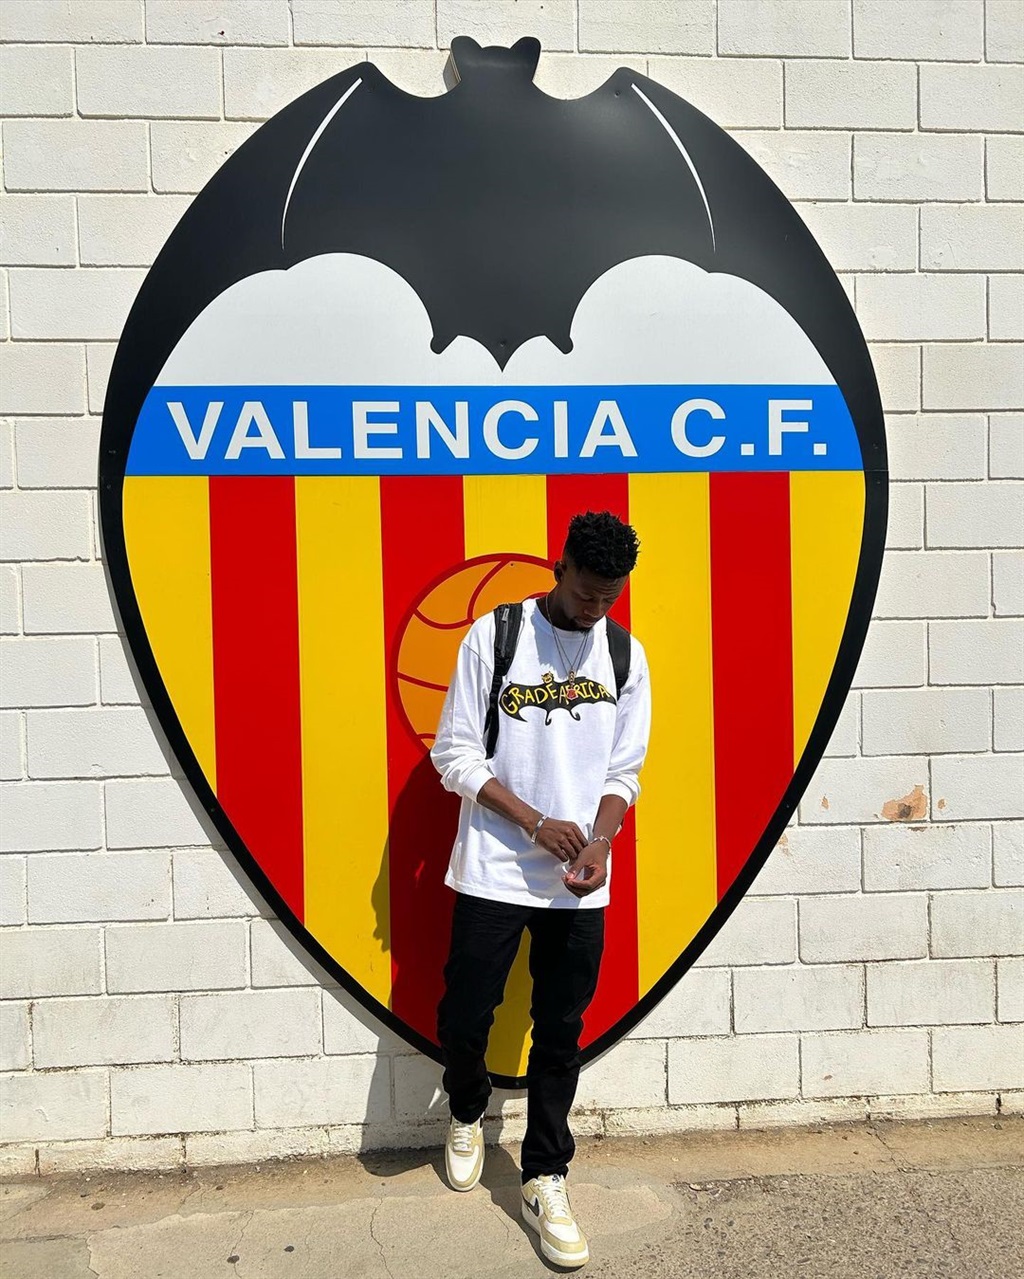 Amapiano star Robot Boii travelled to Valencia for